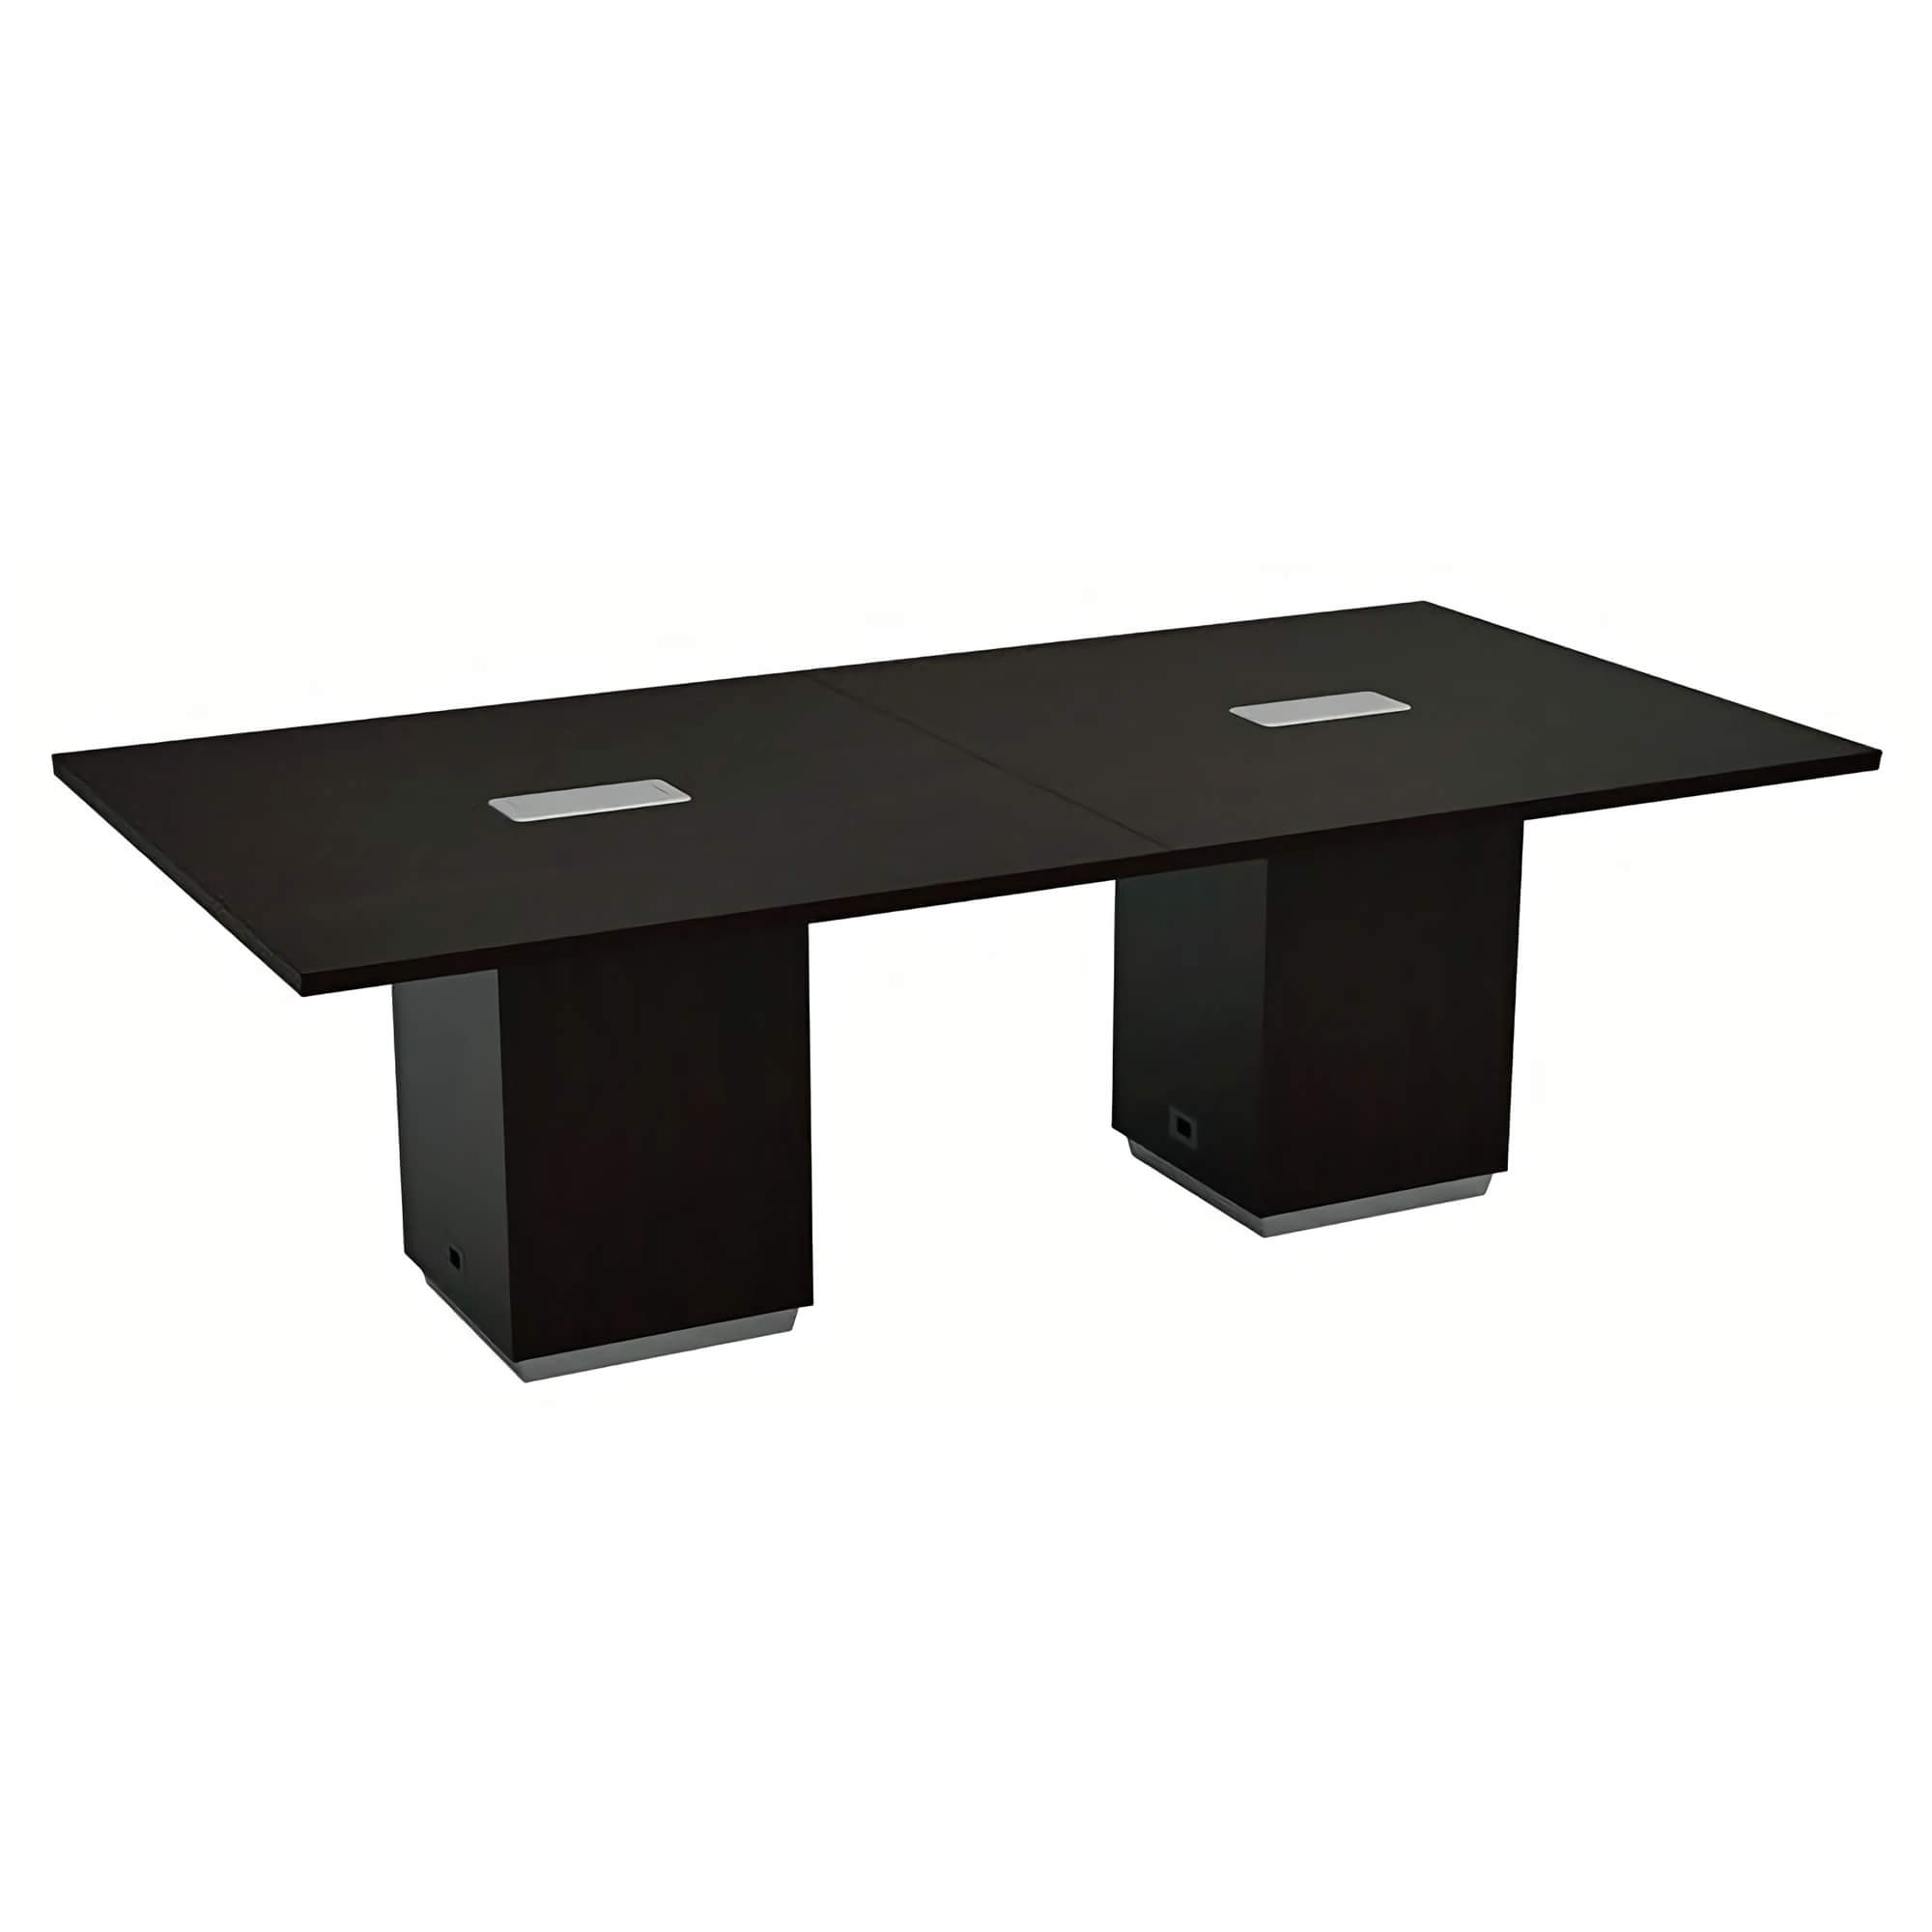 Conference tables CUB TUXDKR 60 PSO 1